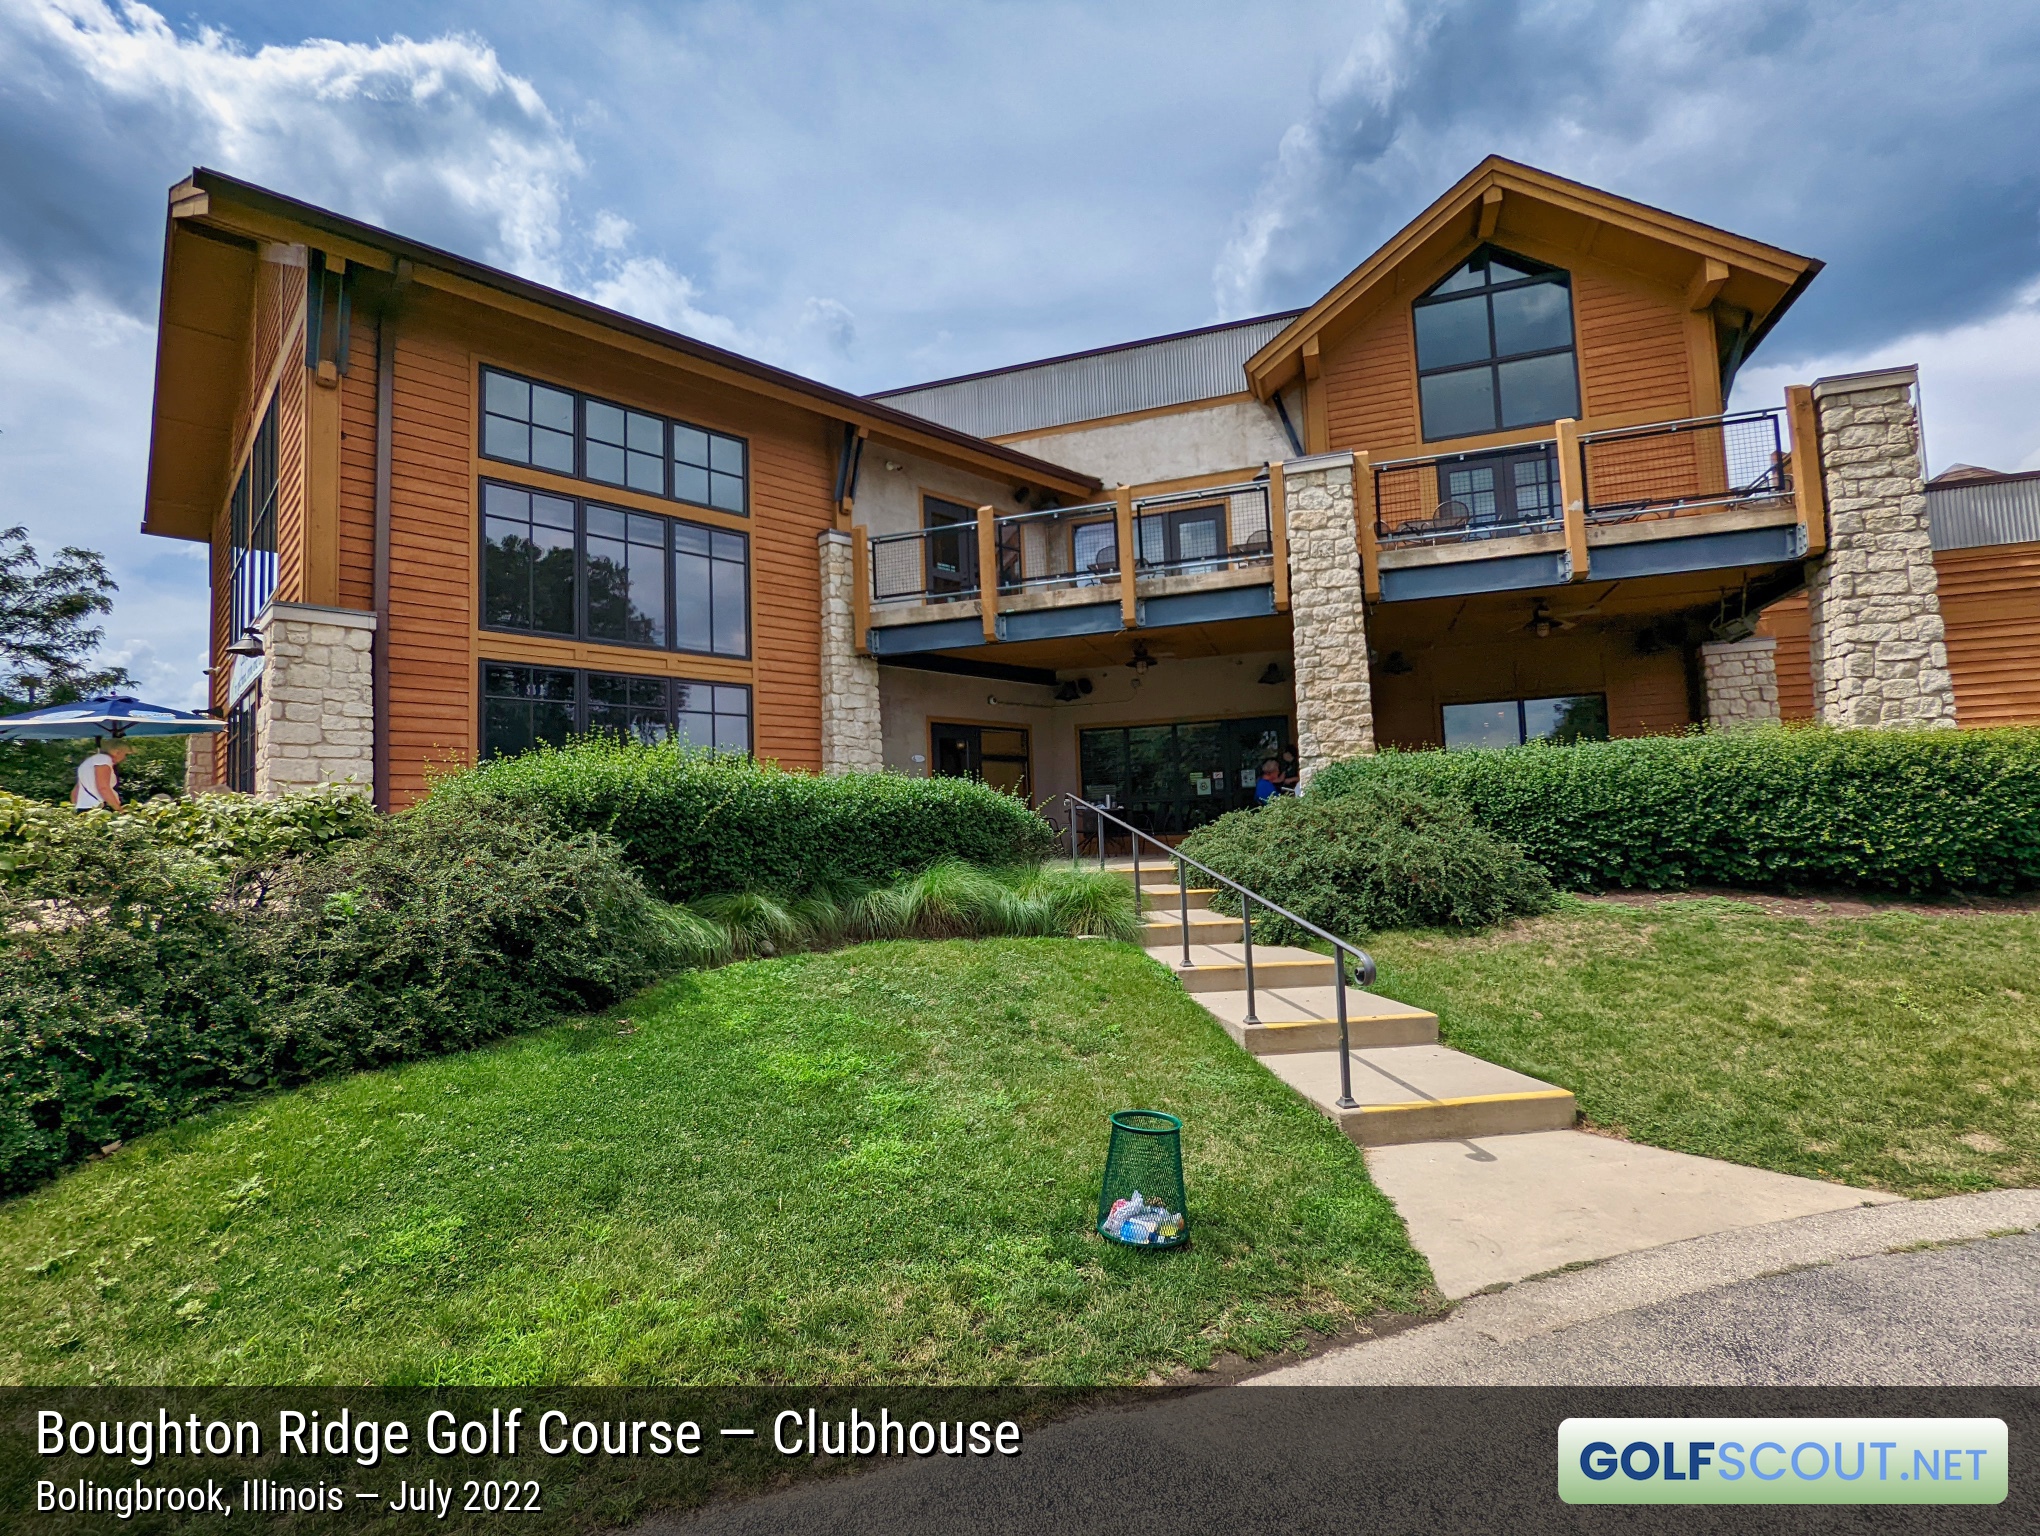 Photo of the clubhouse at Boughton Ridge Golf Course in Bolingbrook, Illinois. 